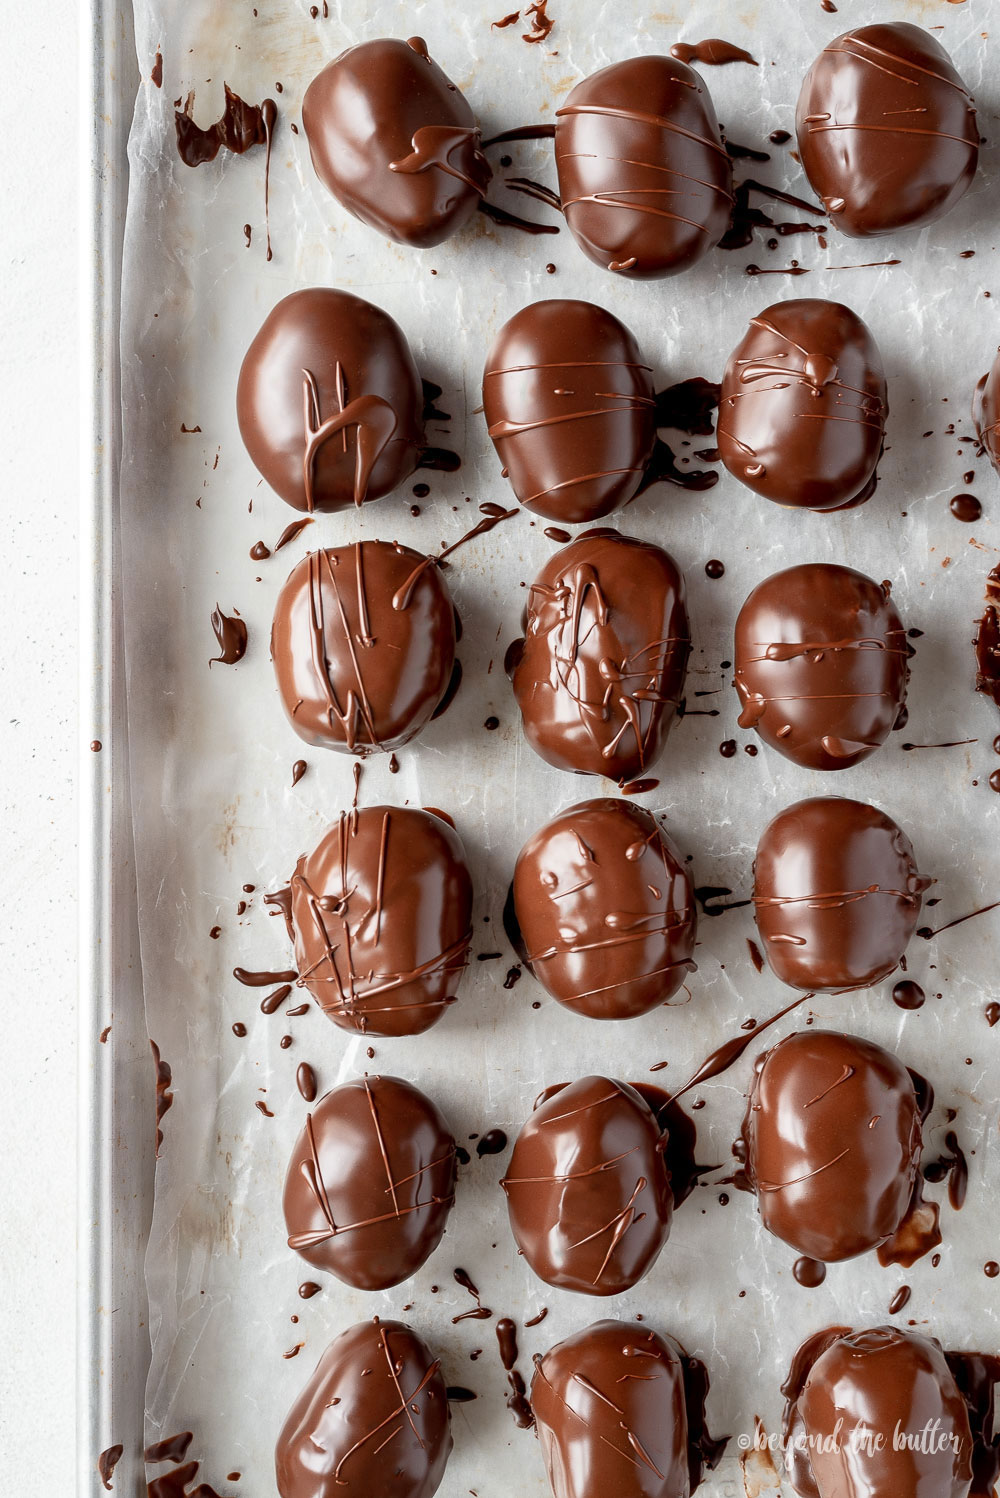 Overhead image of chocolate covered peanut butter eggs on a baking sheet | © Beyond the Butter, LLC